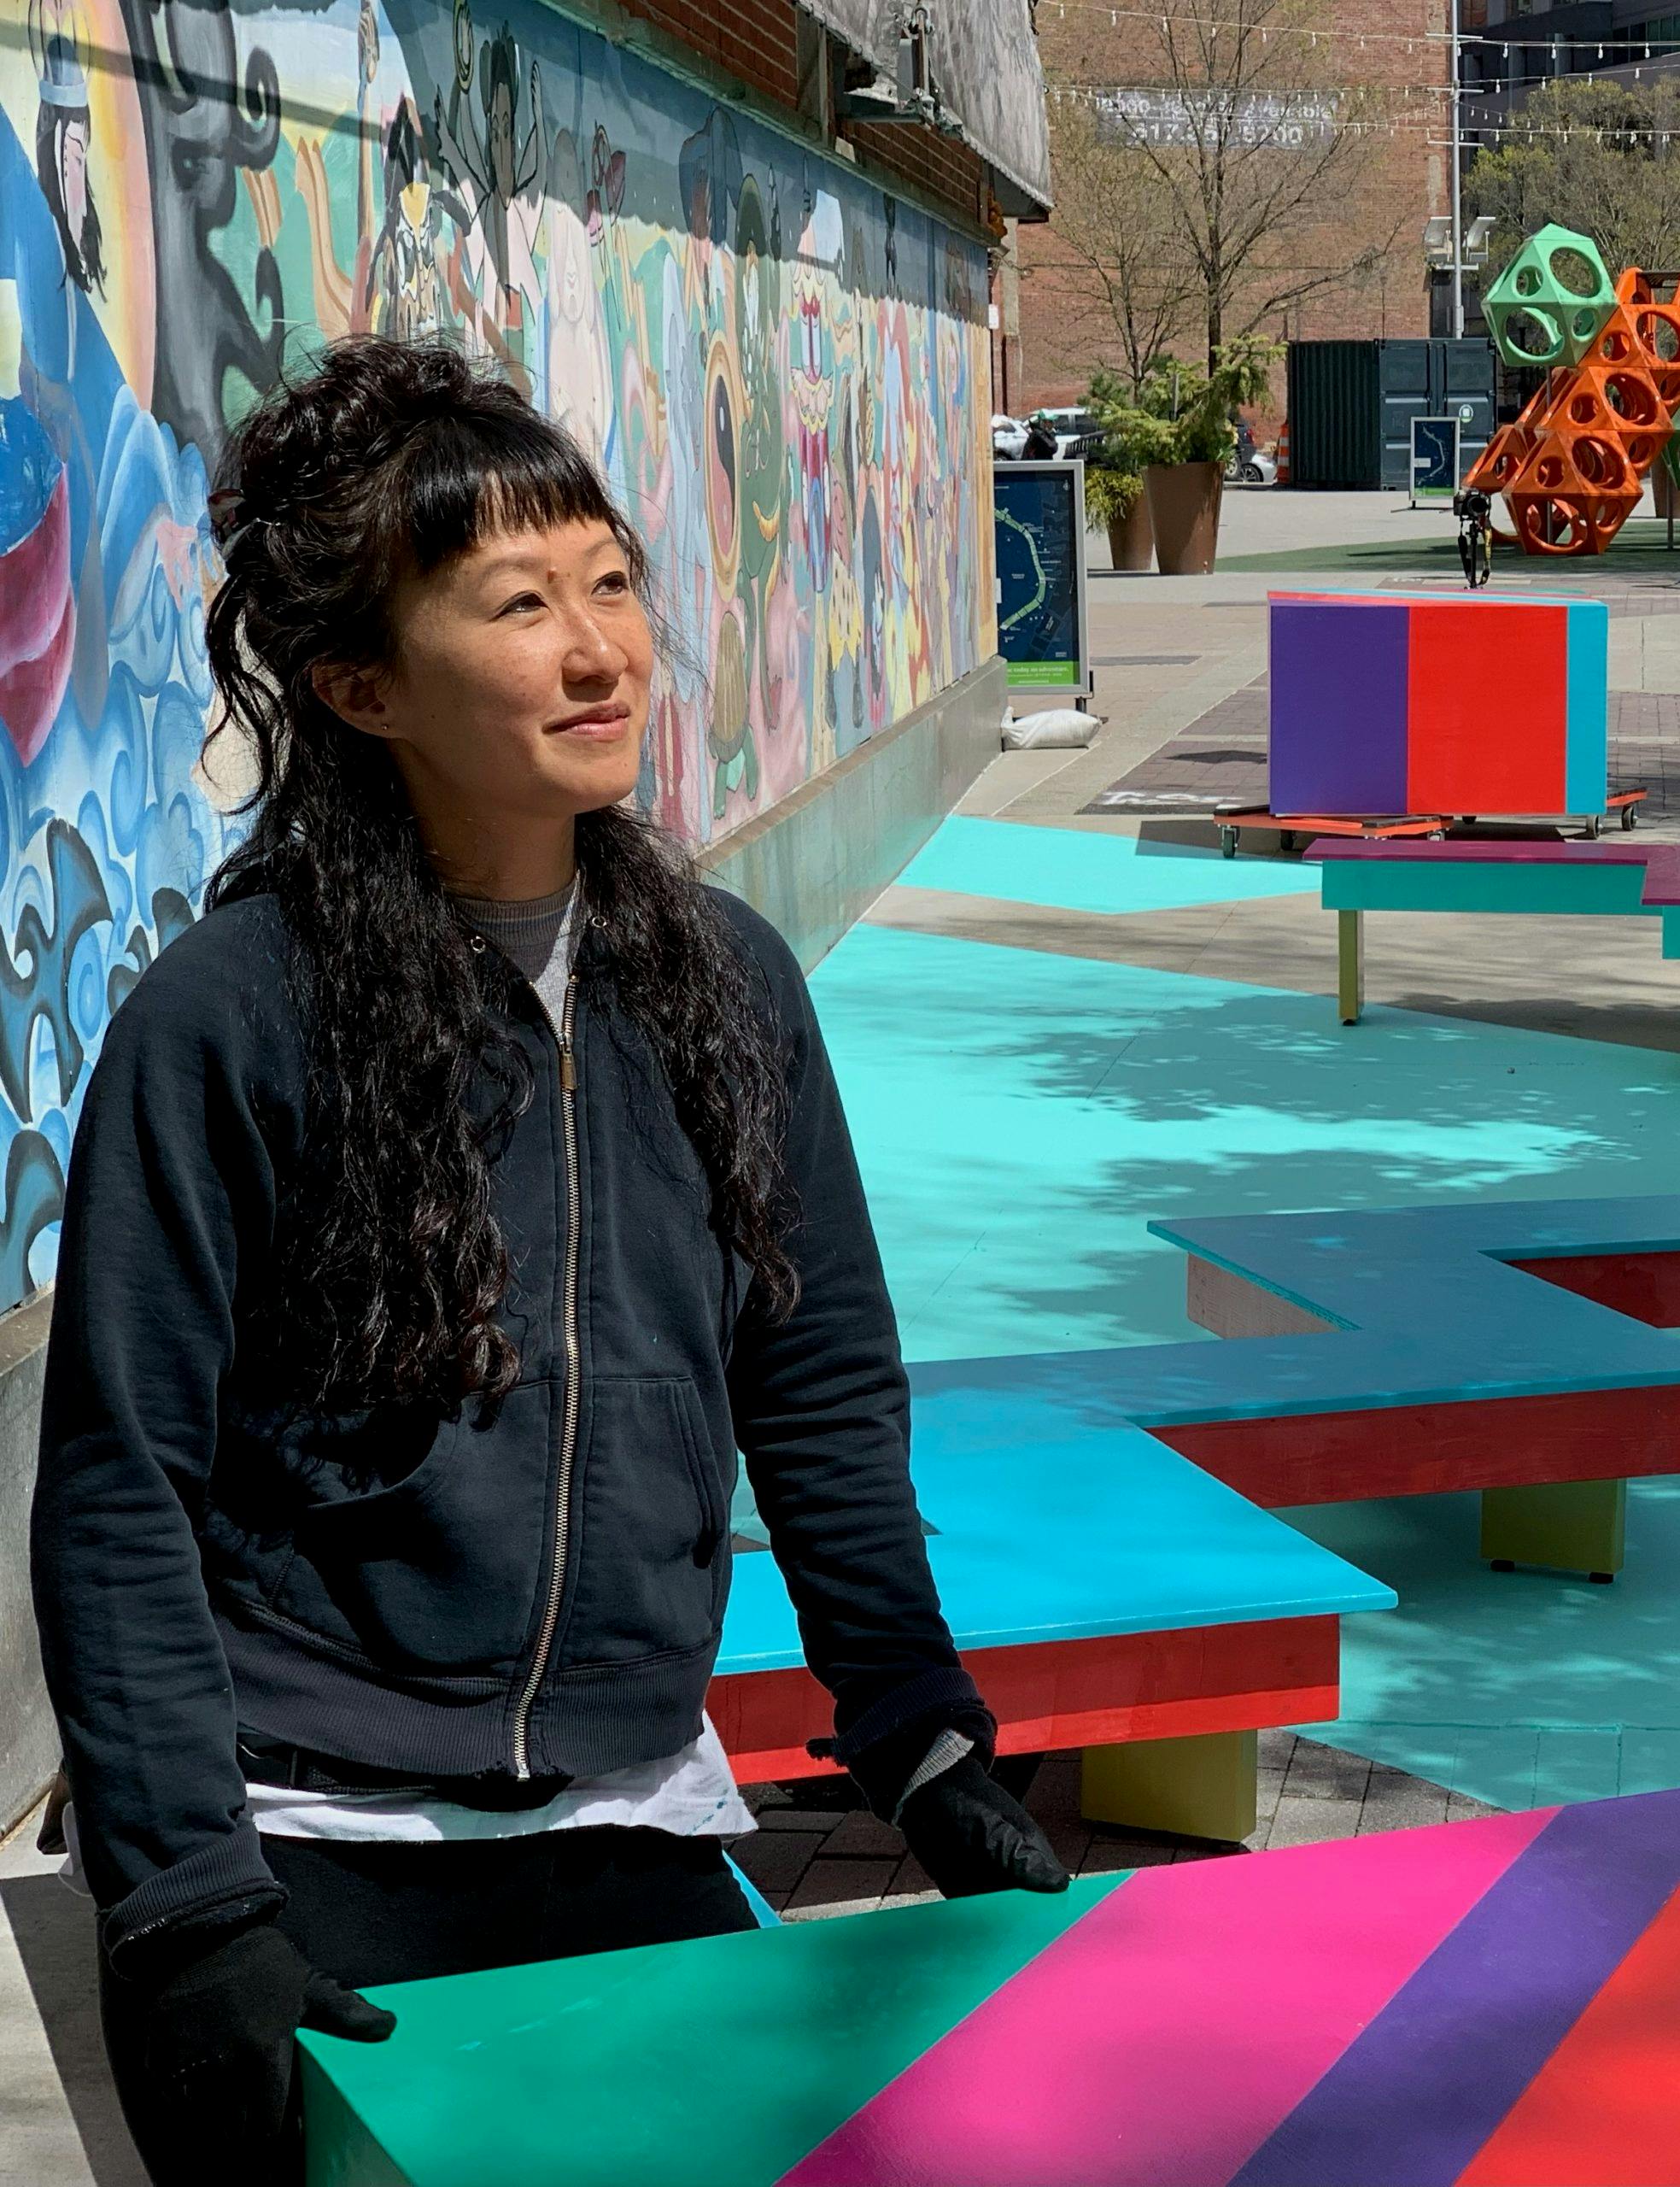 Cheryl Wing-Zi Wong stands with a colorful public work of art behind her.